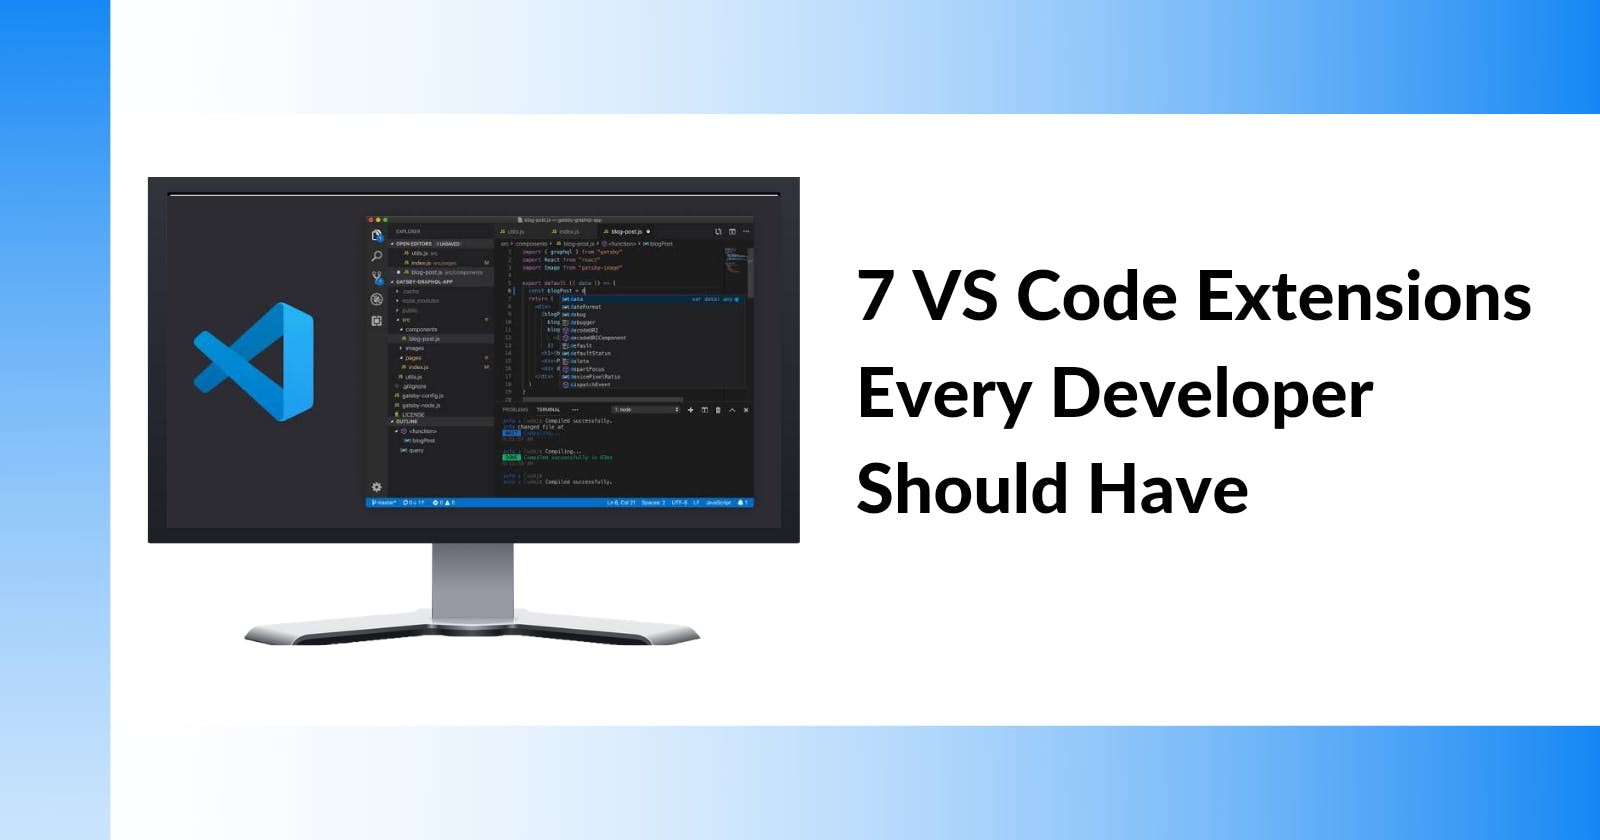 7 VS Code Extensions Every Developer Should Have